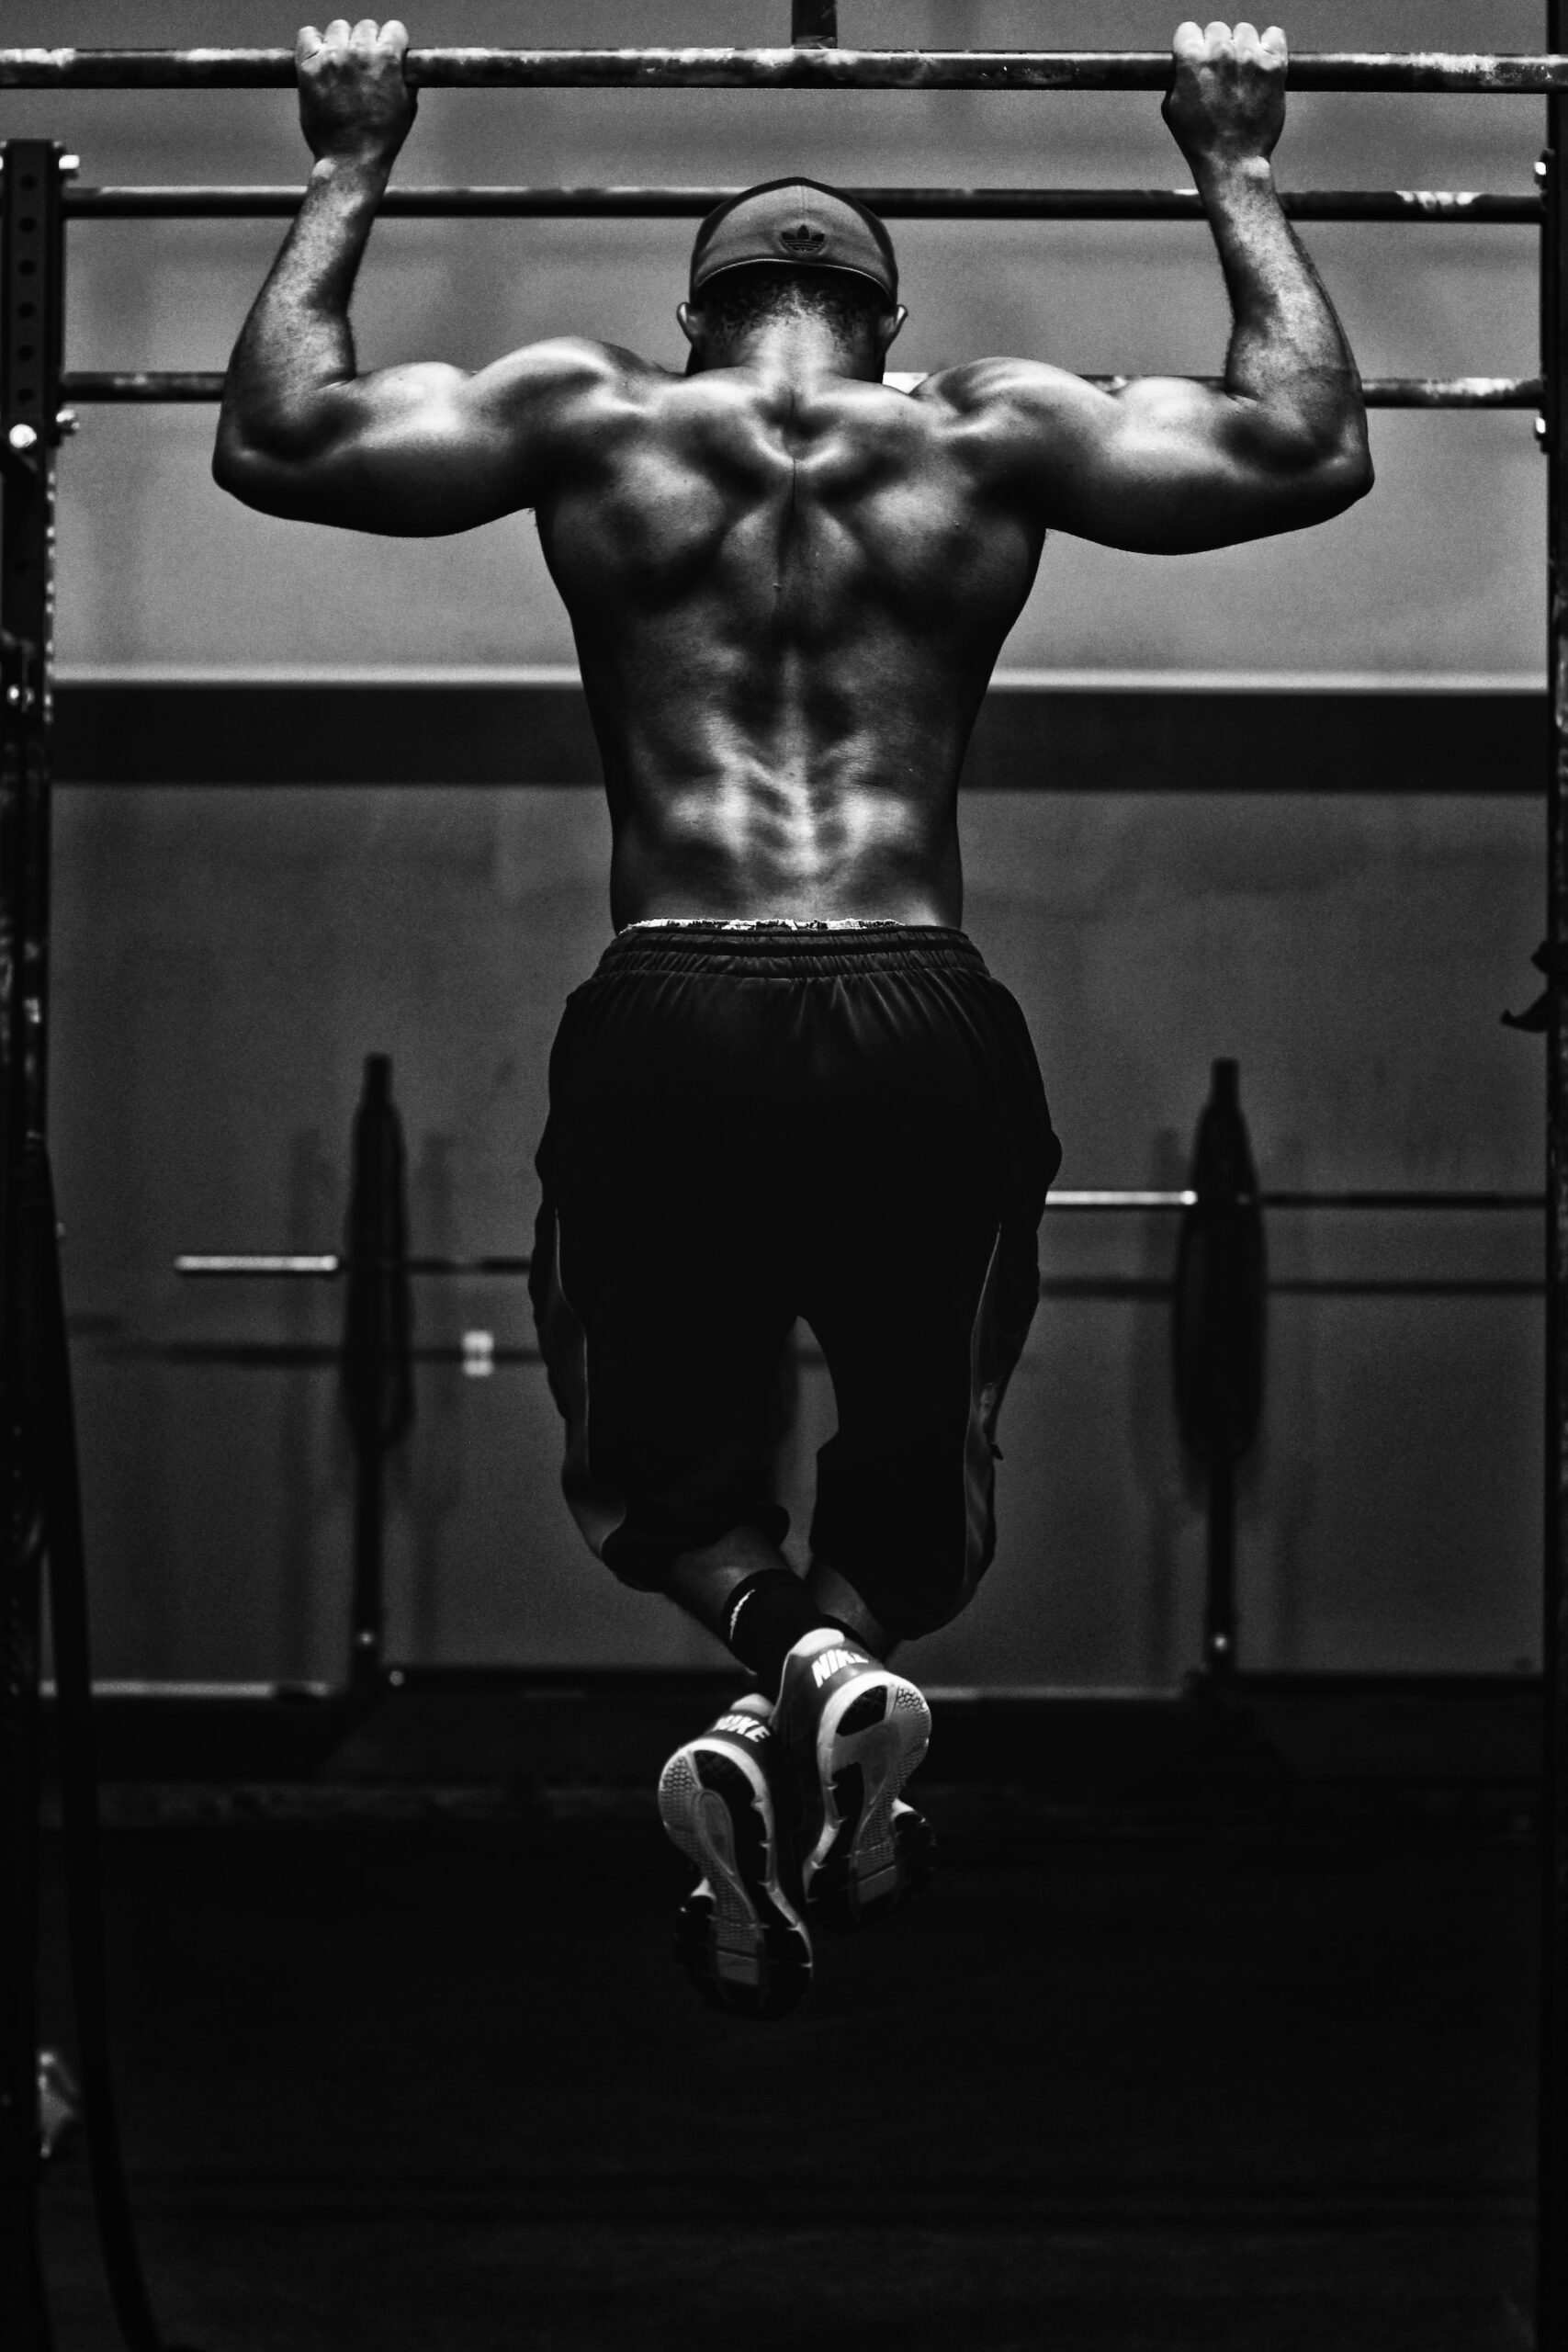 Man exercising by doing pull ups on bar.